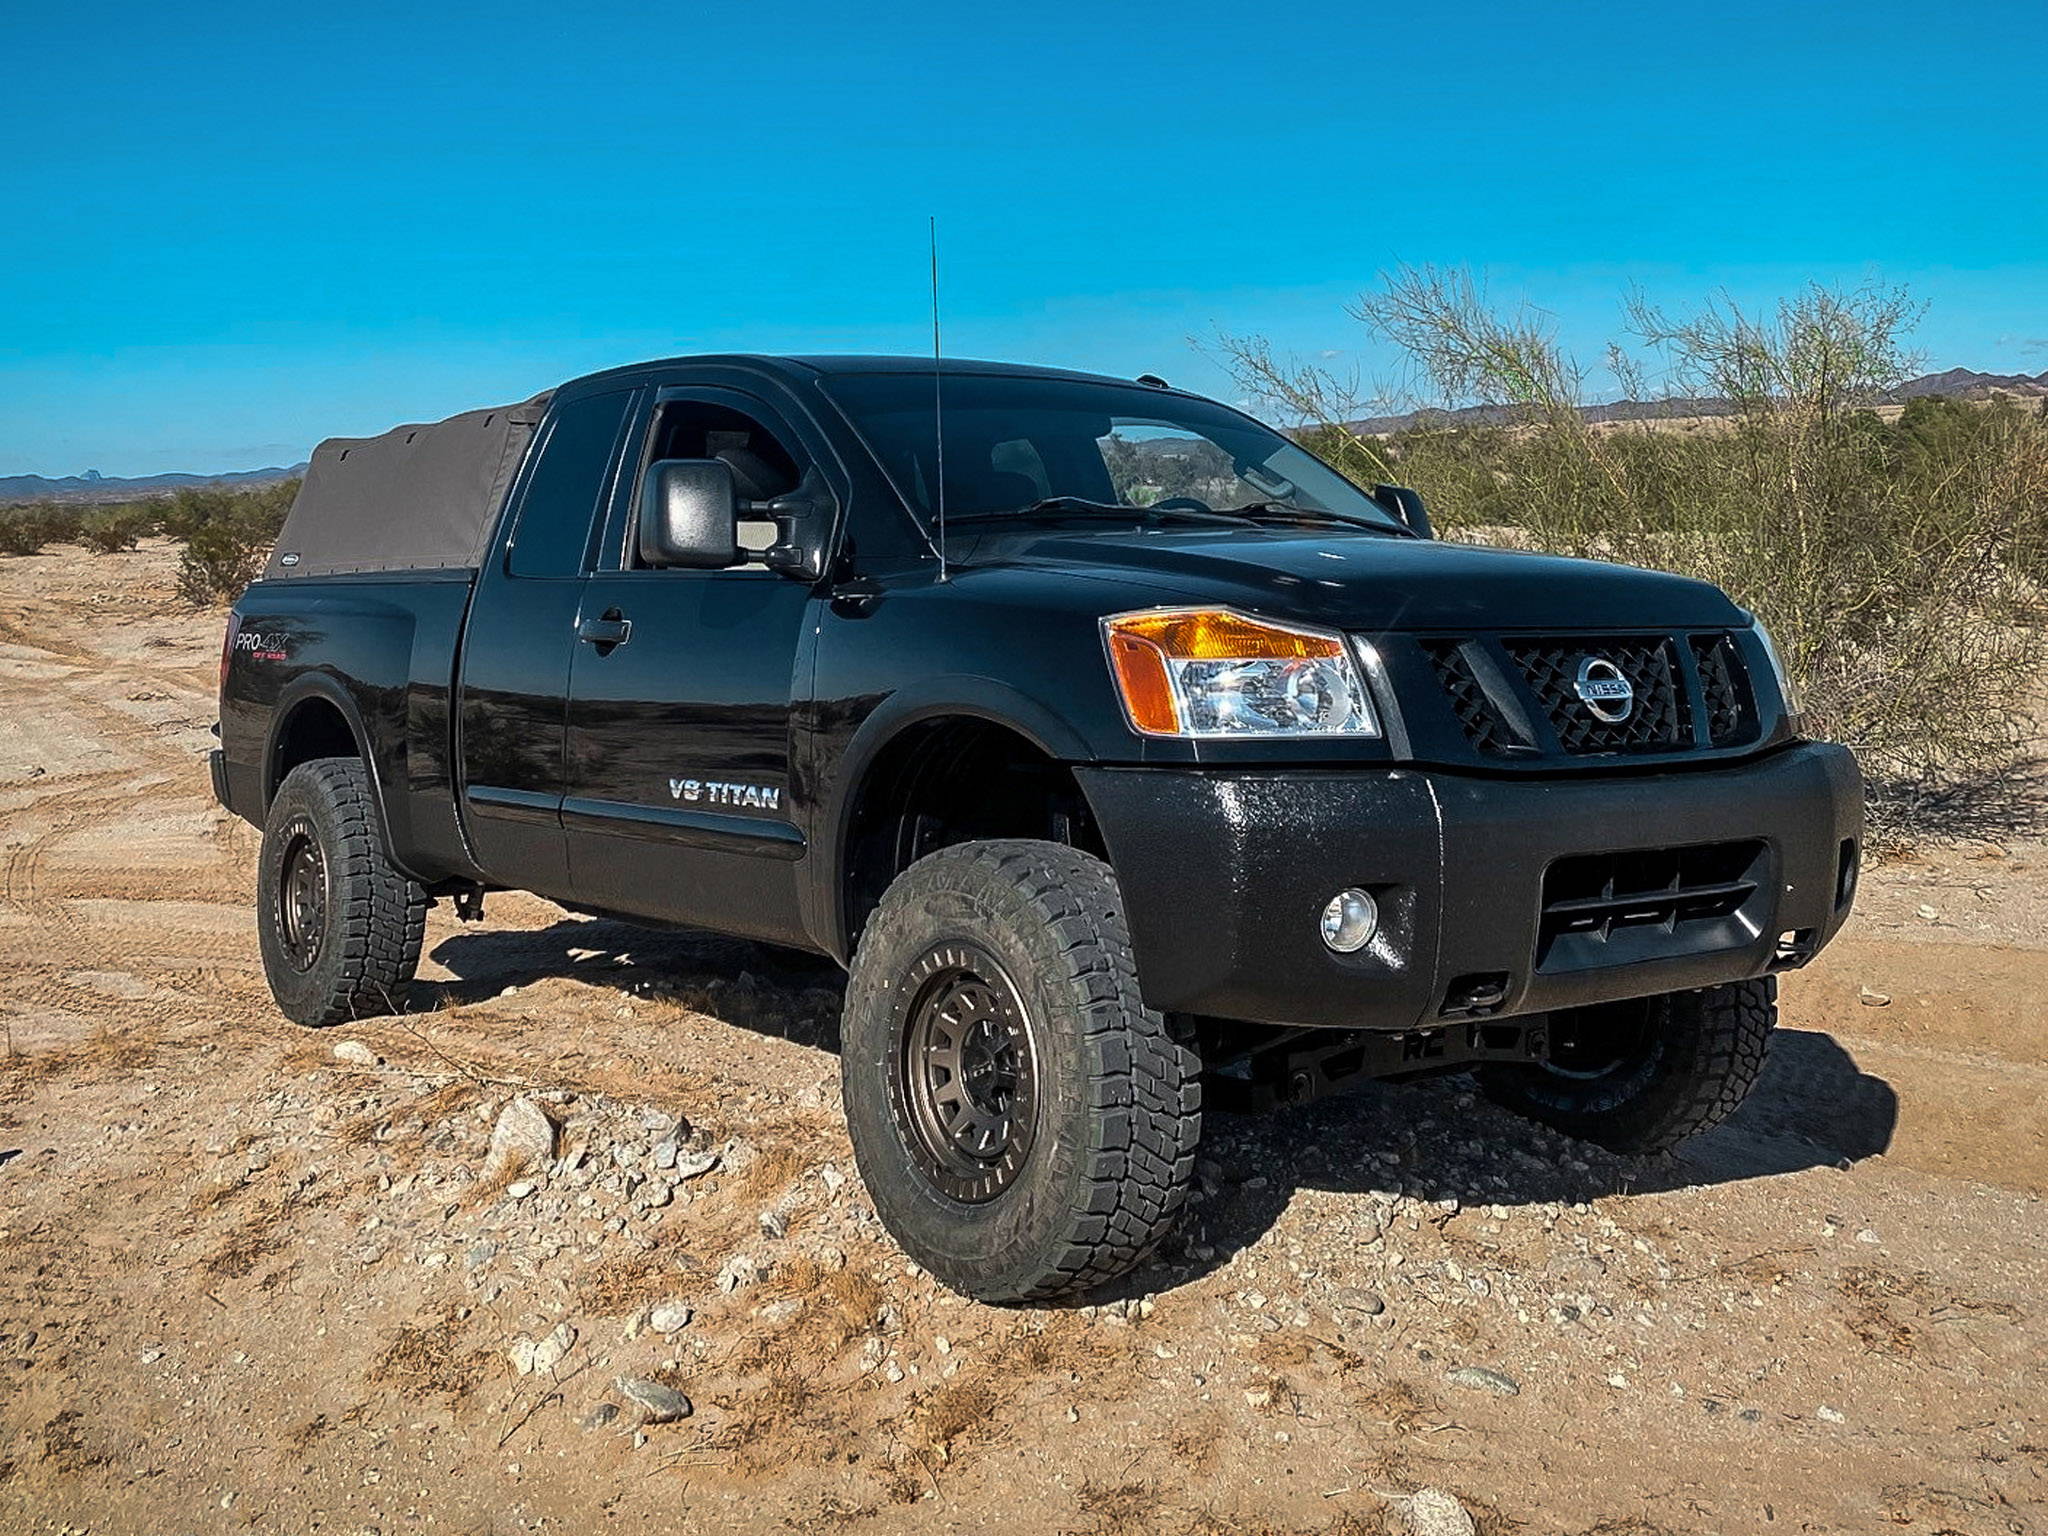 HD Off-Road Overland Sector Wheels 17x9.0 All Satin Bronze on Nissan Titan Pro 4X Off-Road